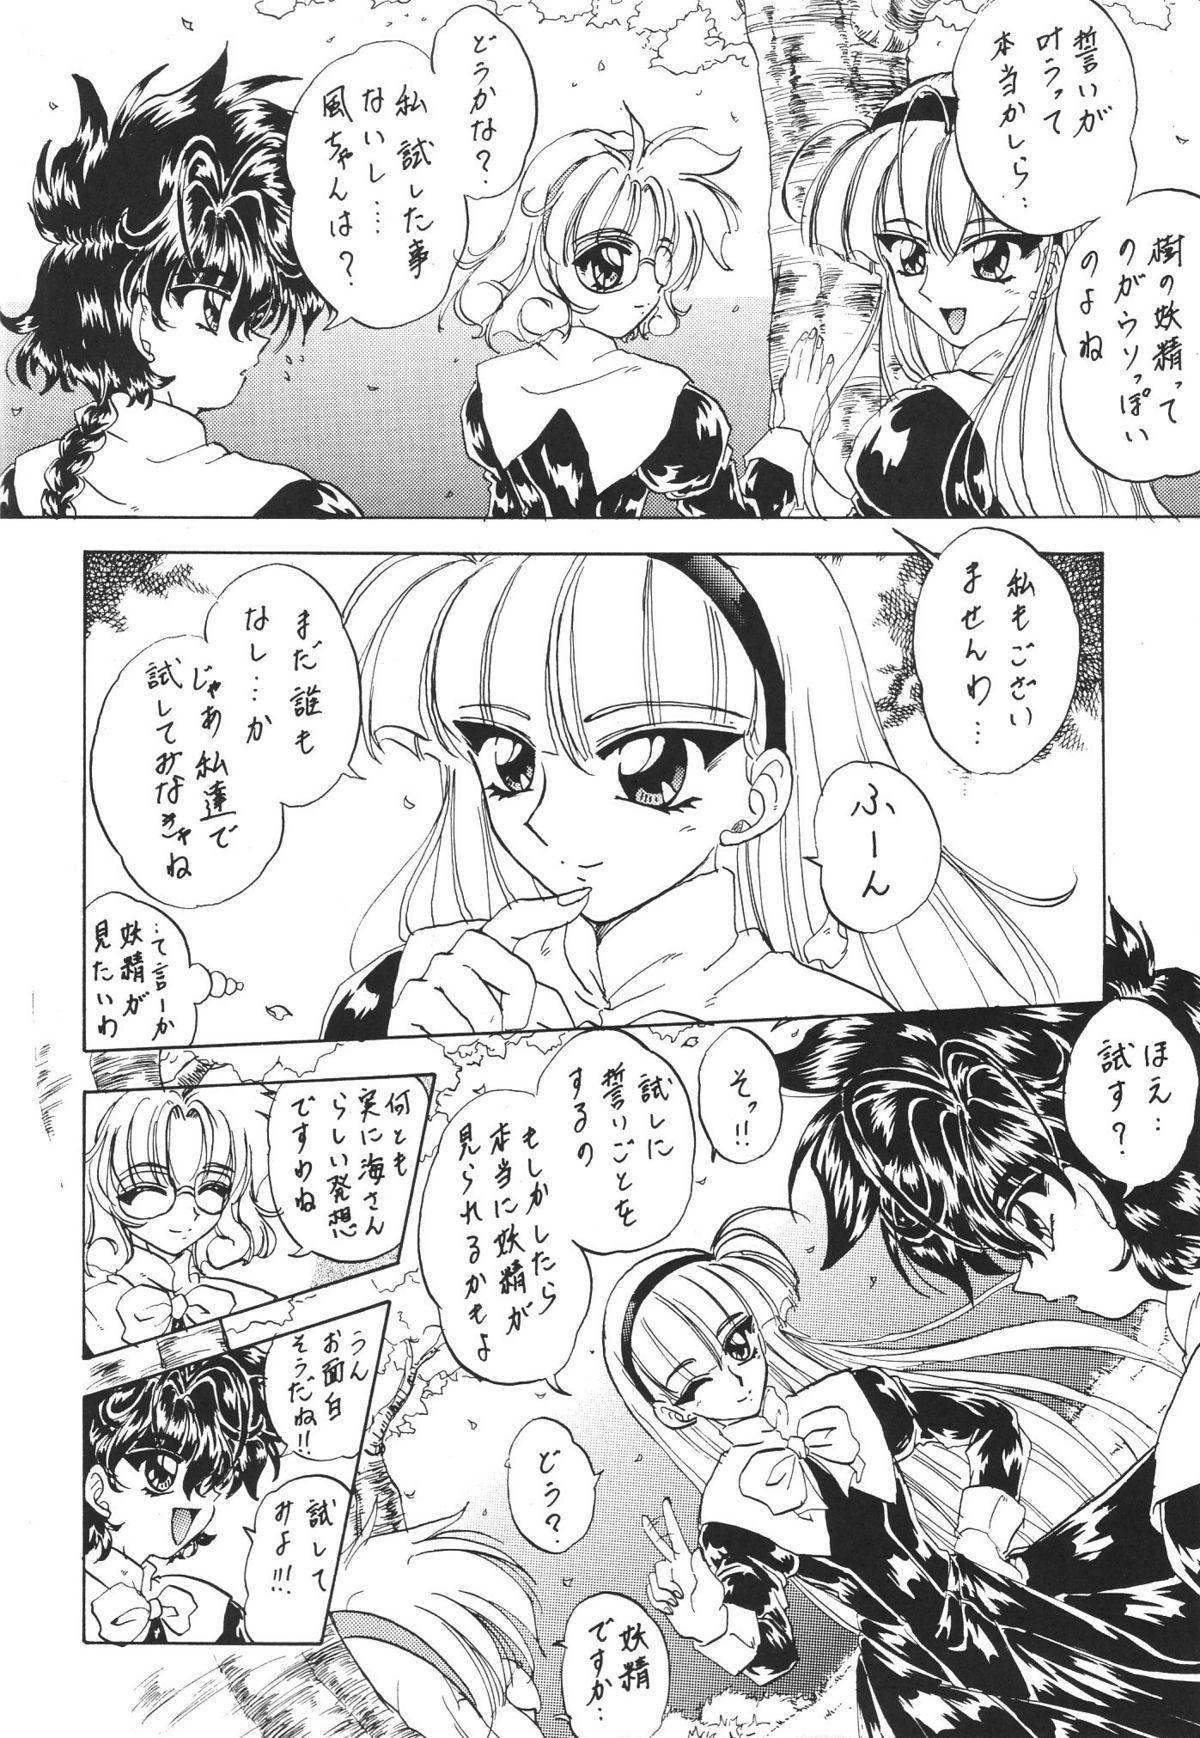 Gozo Stale World V - Magic knight rayearth Adult Toys - Page 7